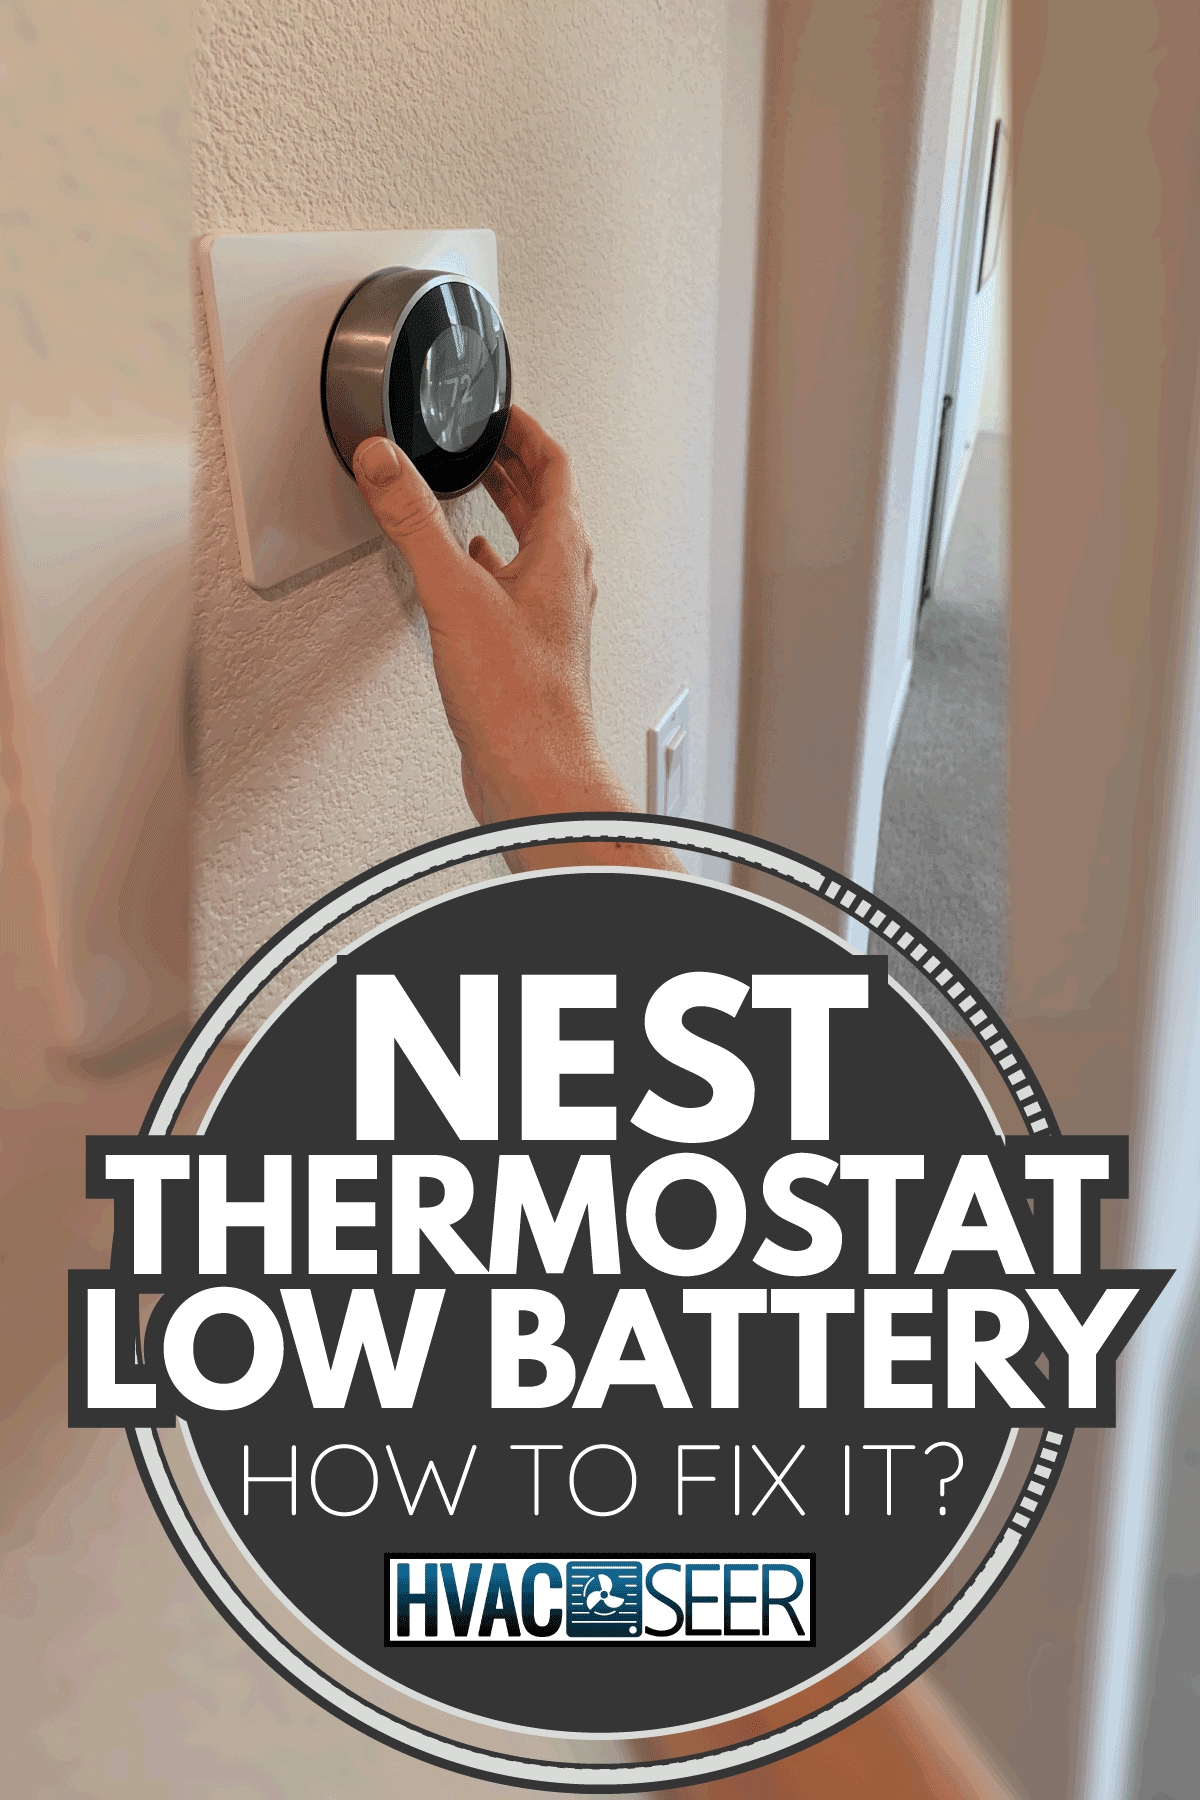 Changing the digital thermostat temperature. Nest Thermostat Low Battery—How To Fix It